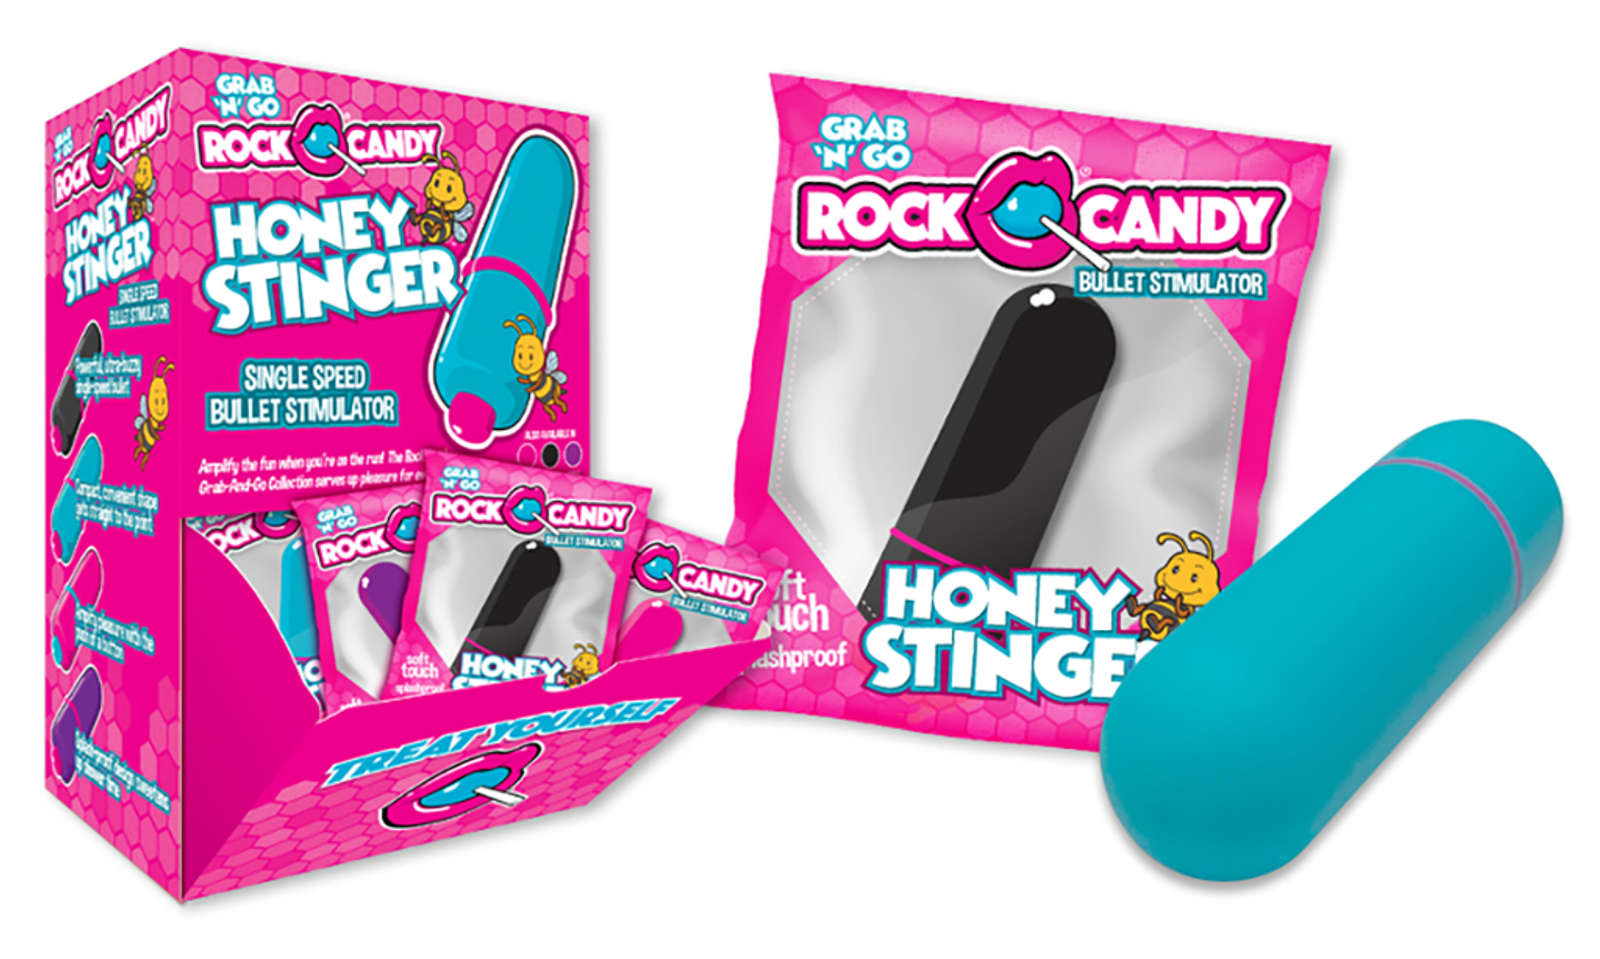 Rock Candy Toys Offers ‘Honey Stinger’ Grab-N-Go Display